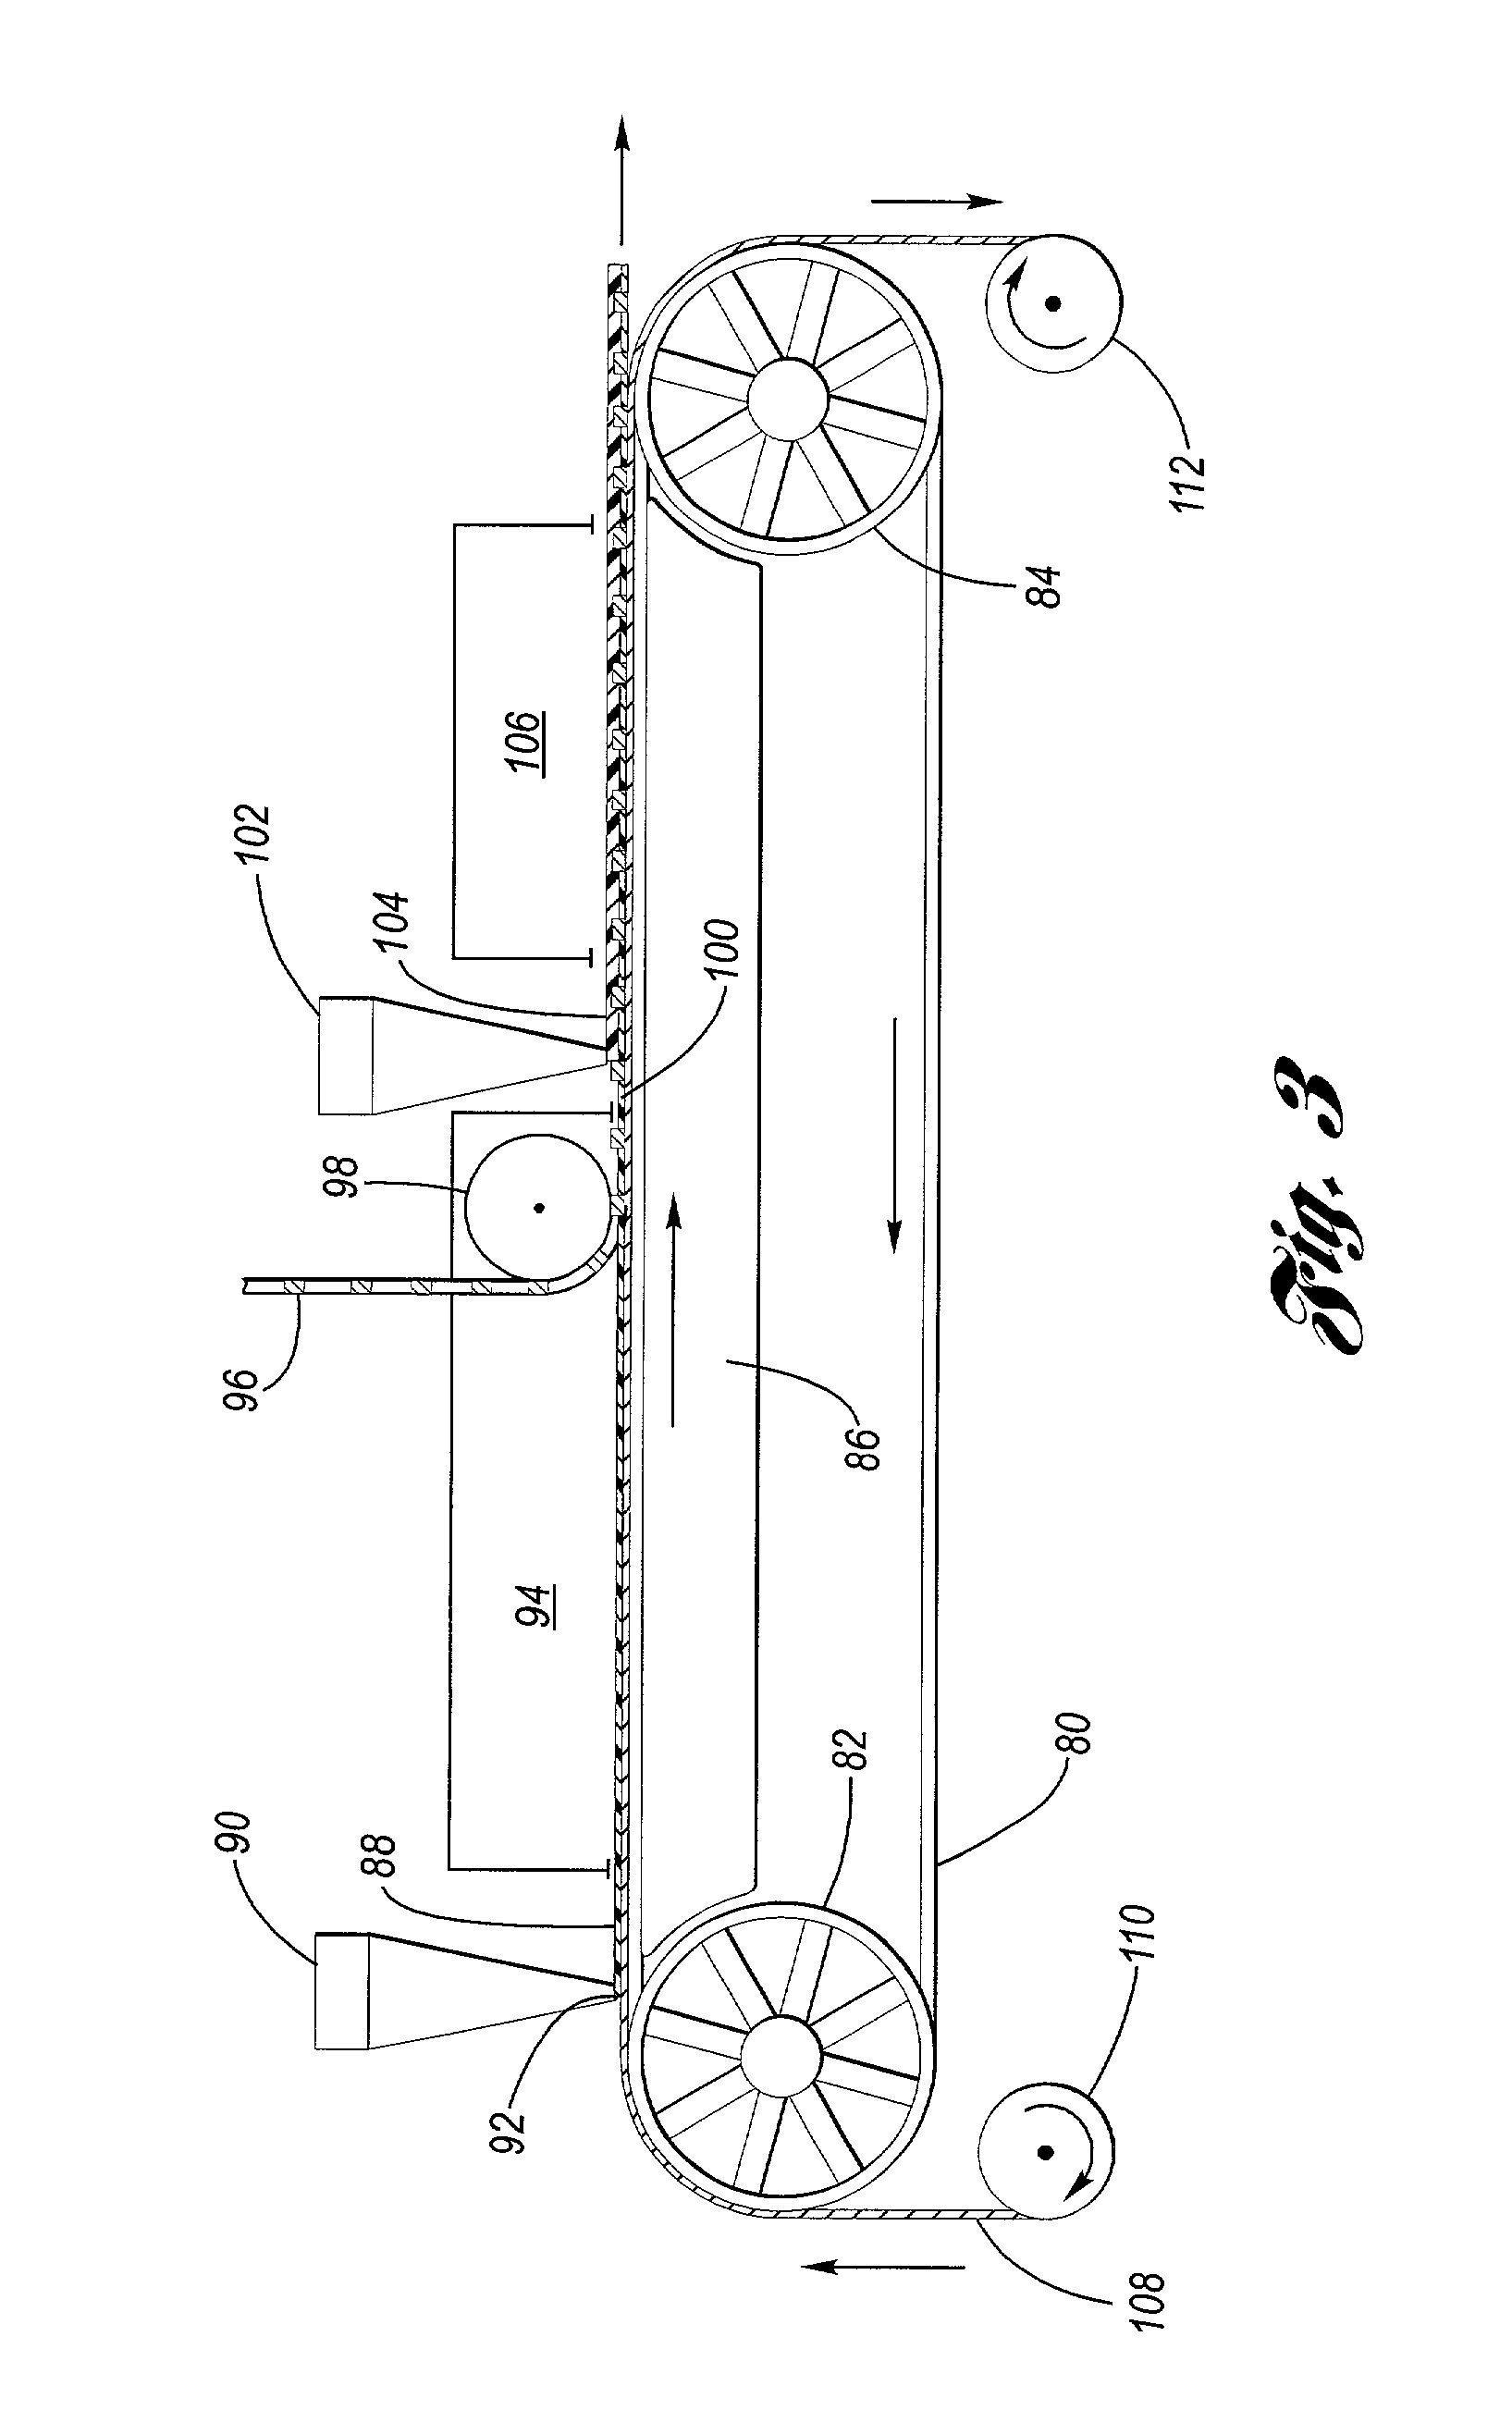 System and method for multilayer fabrication of lithium polymer batteries and cells using surface treated separators